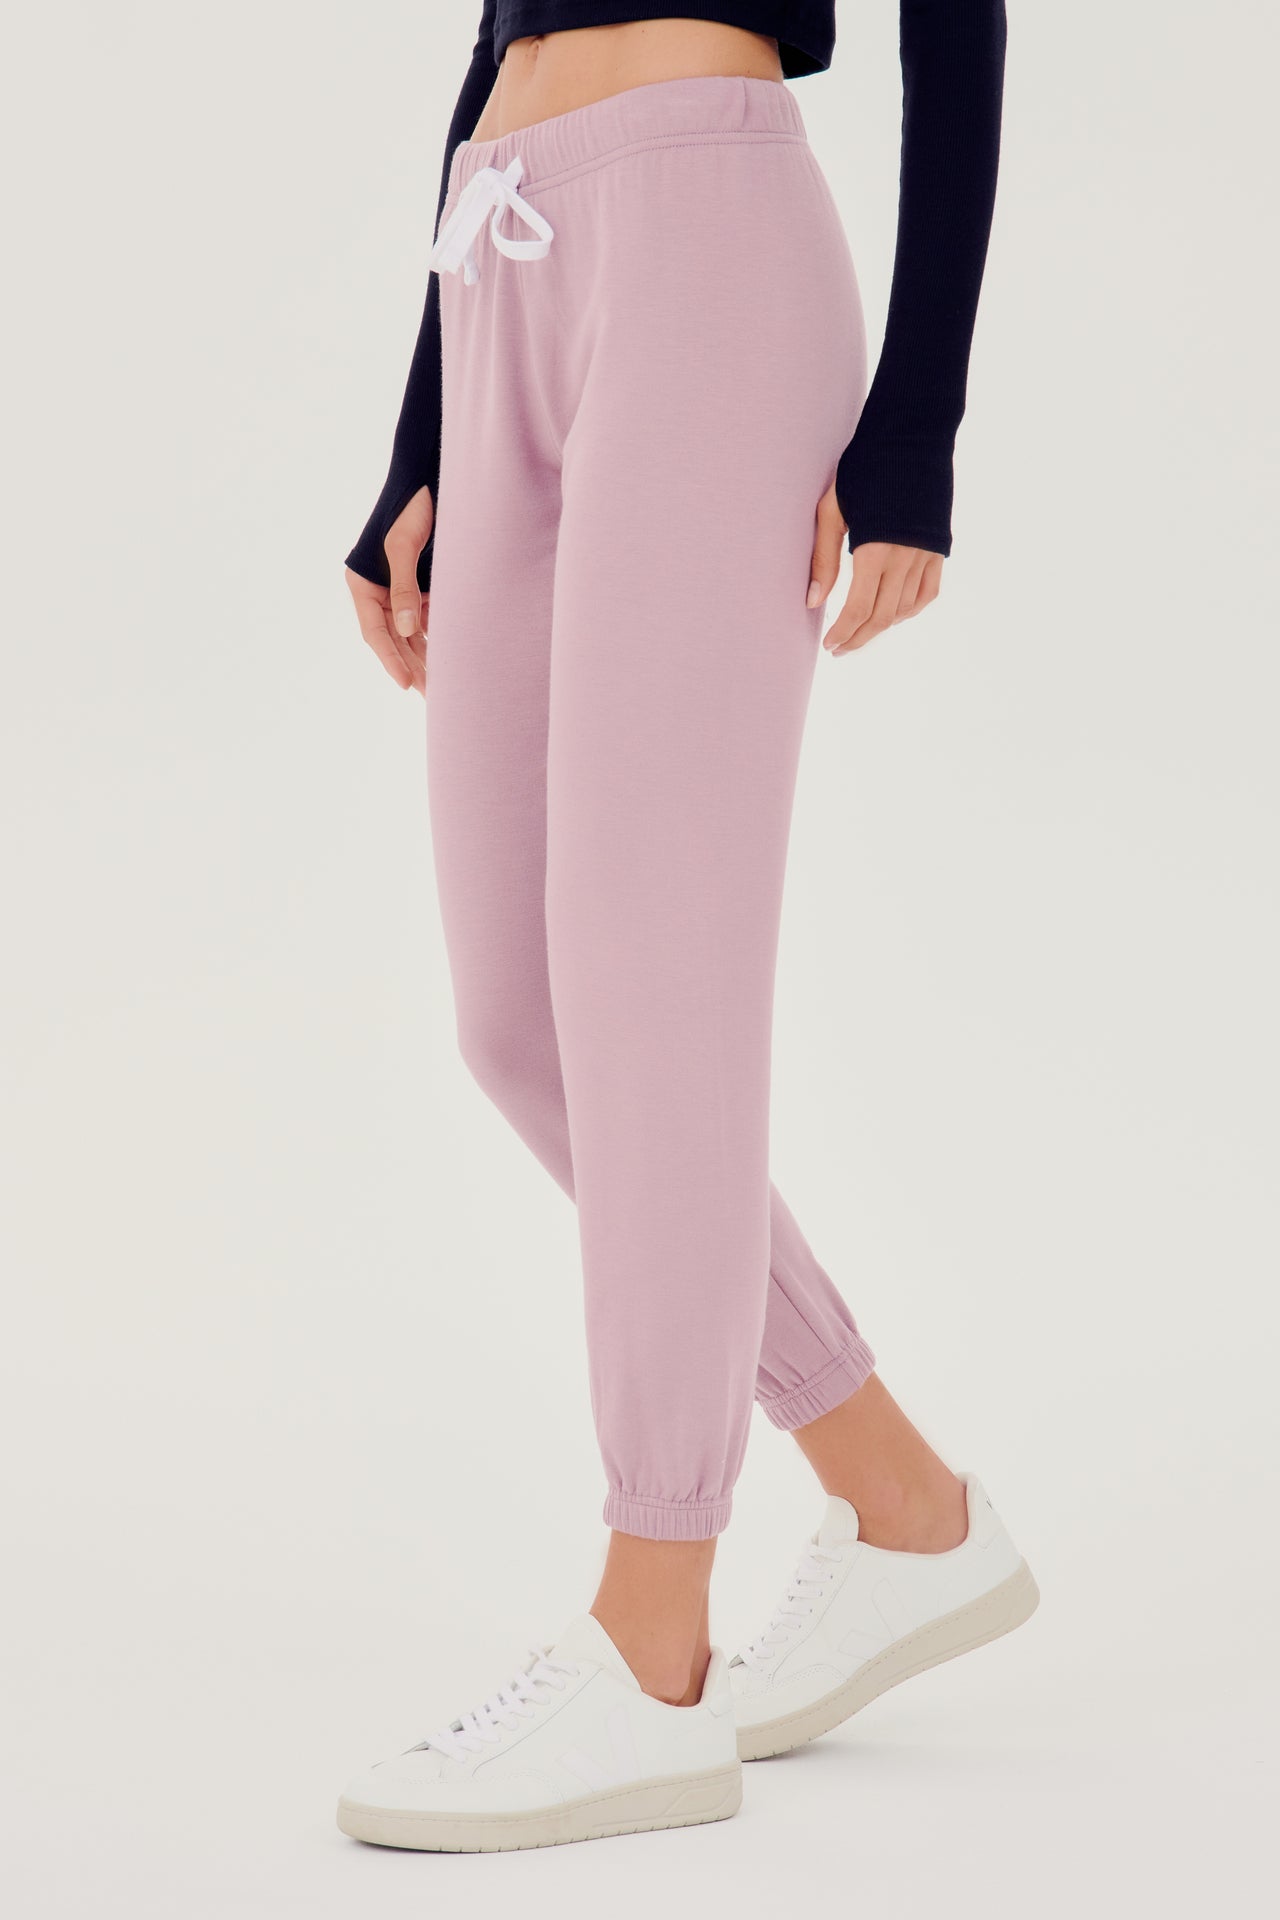 Front side view of woman wearing light pink sweatpant jogger with white drawstring and black turtleneck cropped long sleeve paired with white shoes